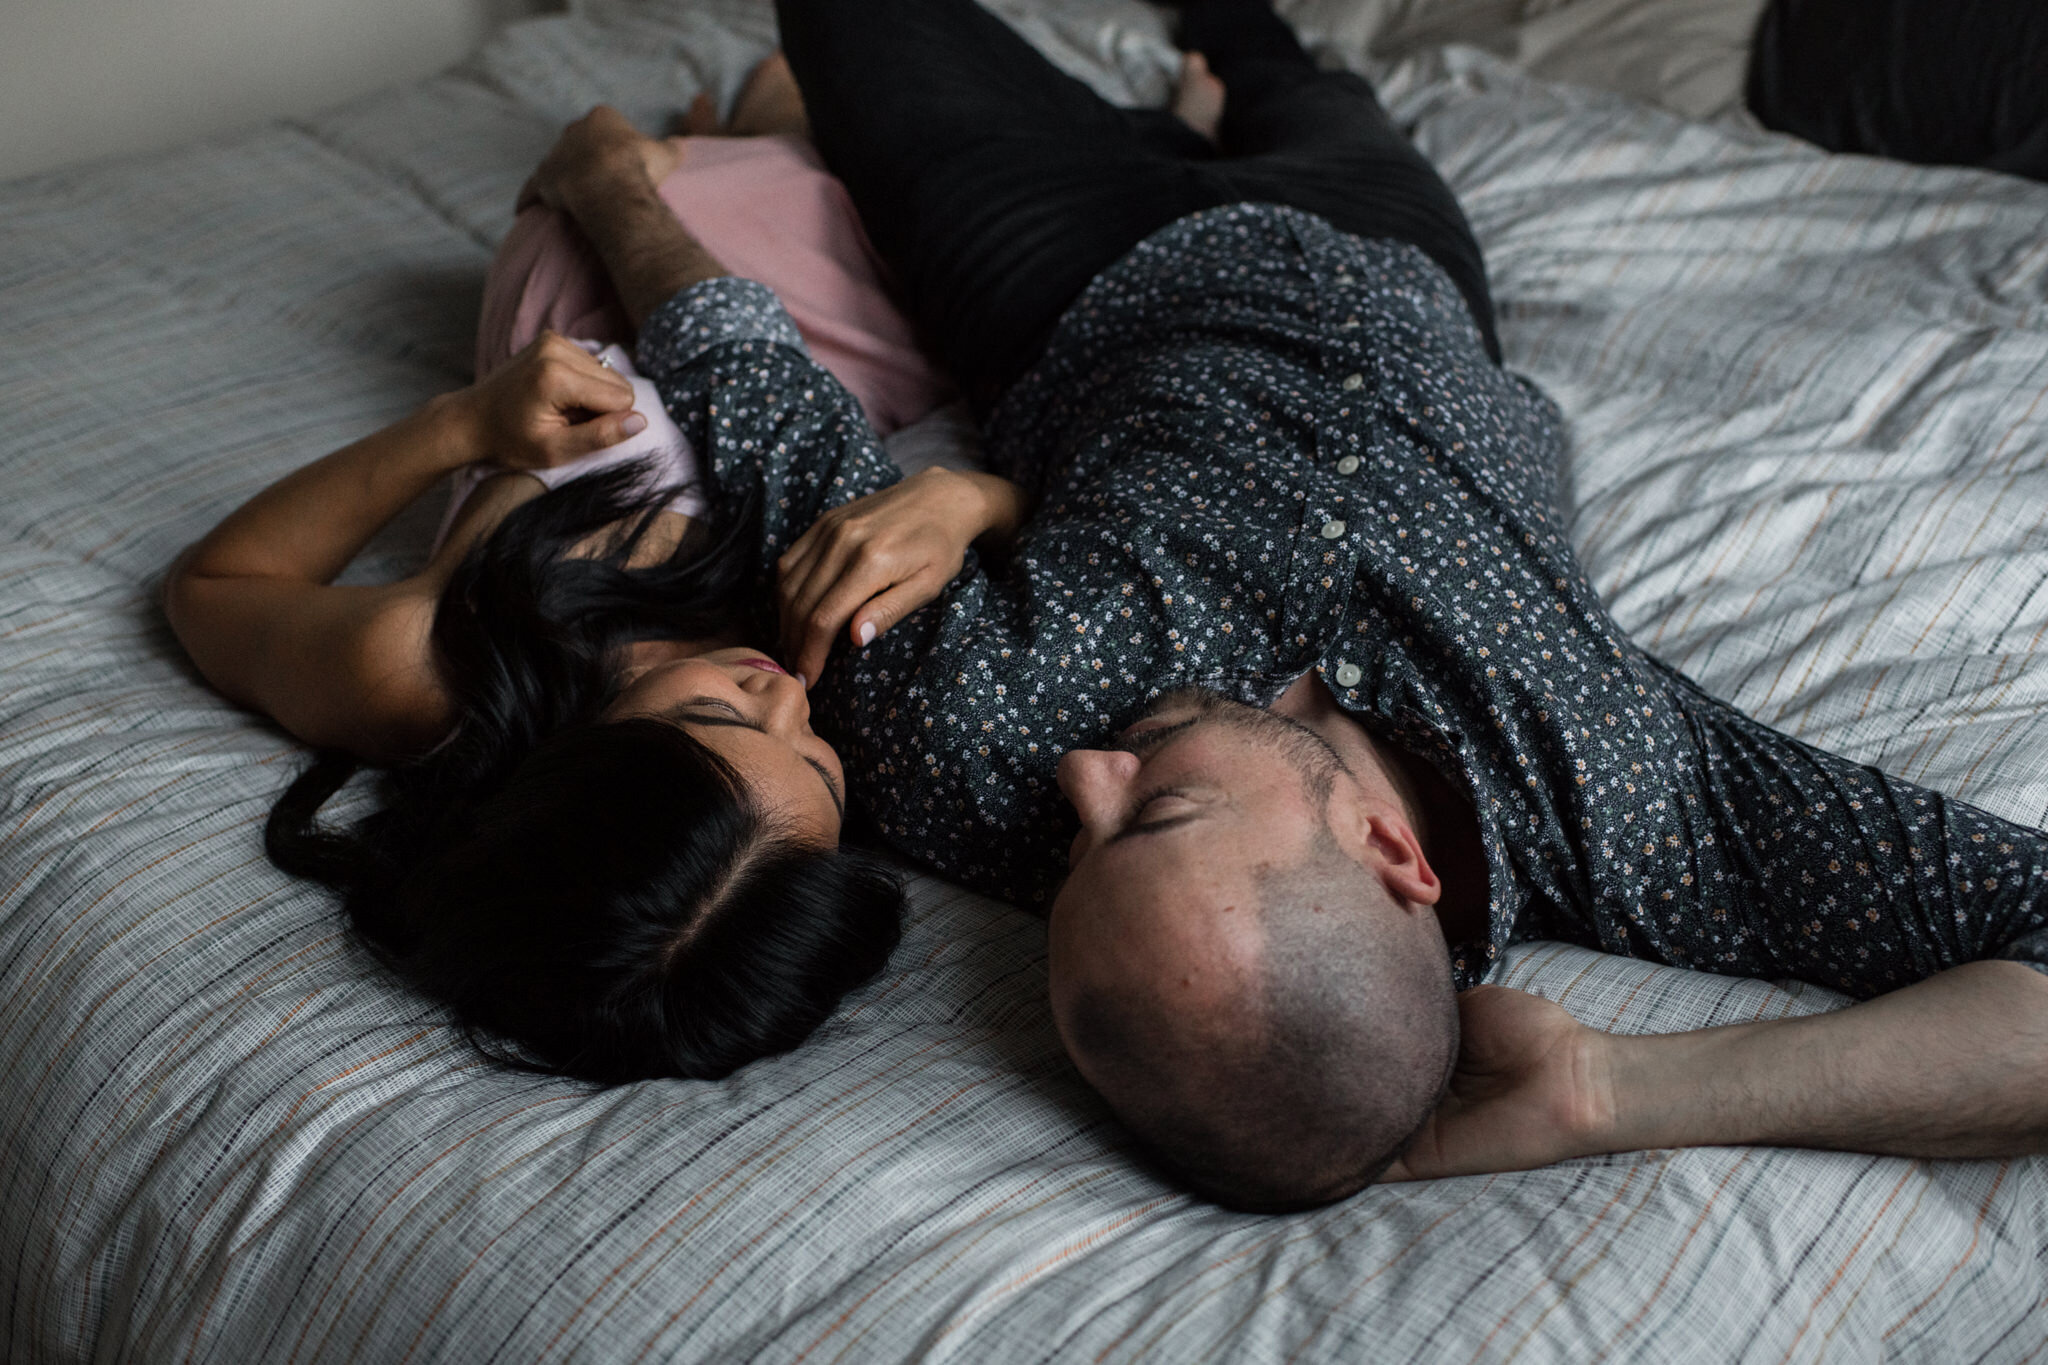 977-indoors-engagement-shoot-toronto-downtown-apartment-couples-photography-intimate.jpg